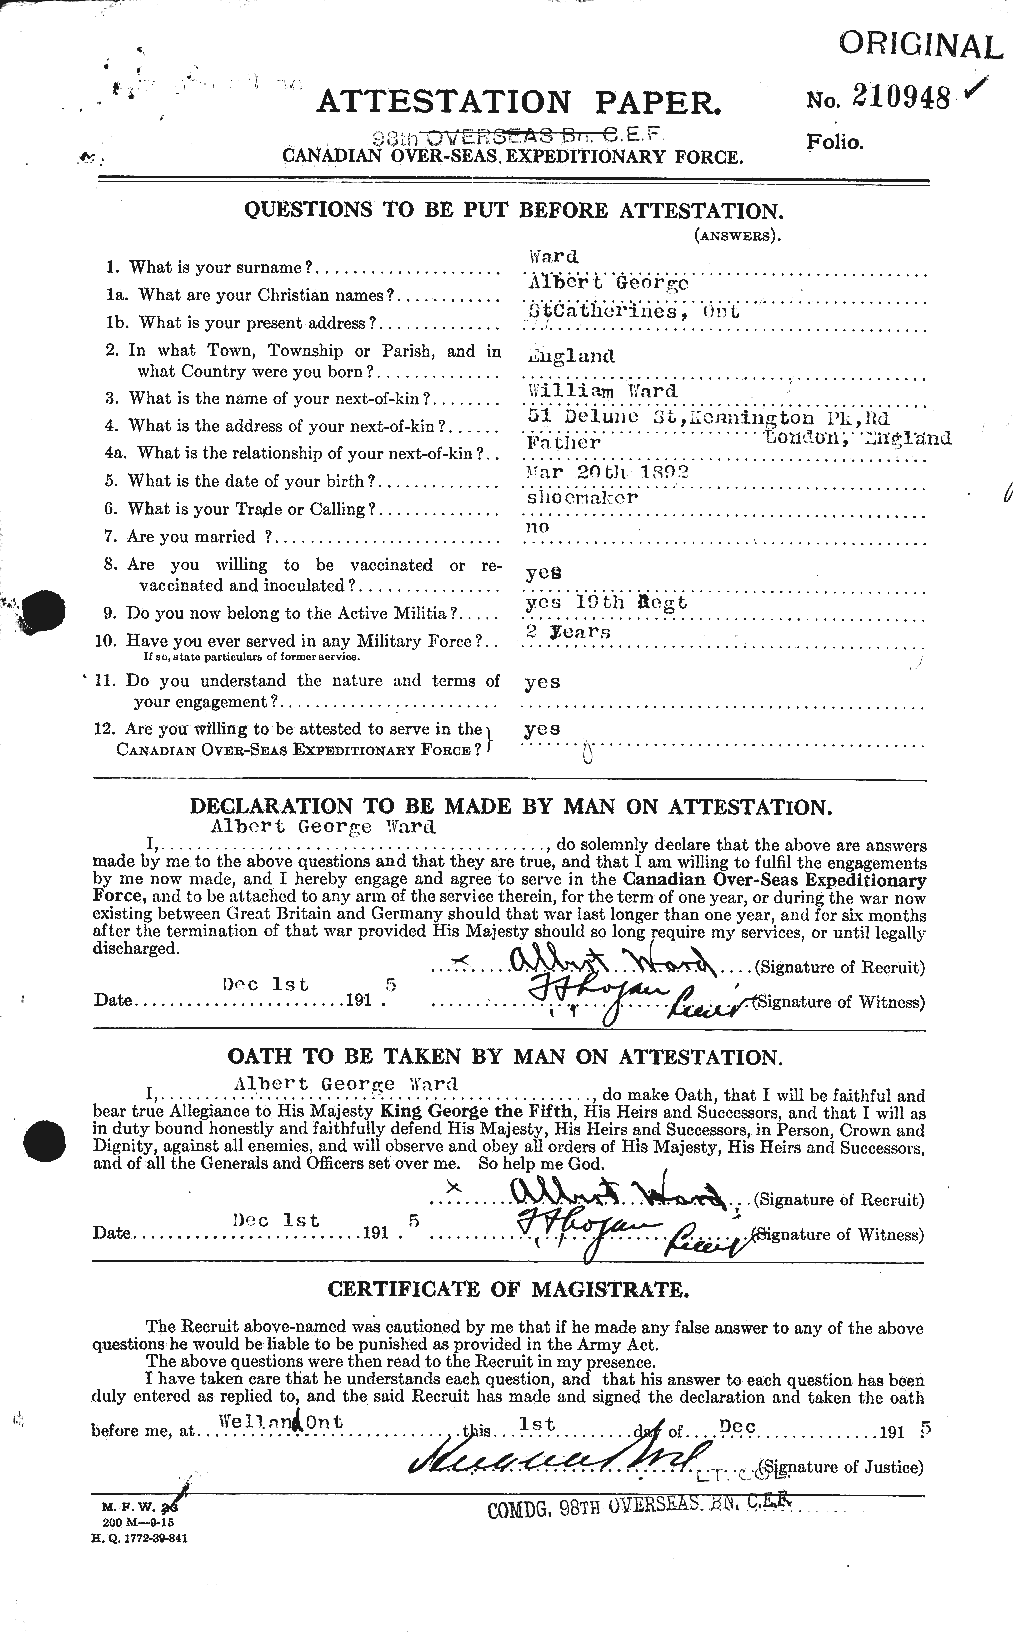 Personnel Records of the First World War - CEF 655097a